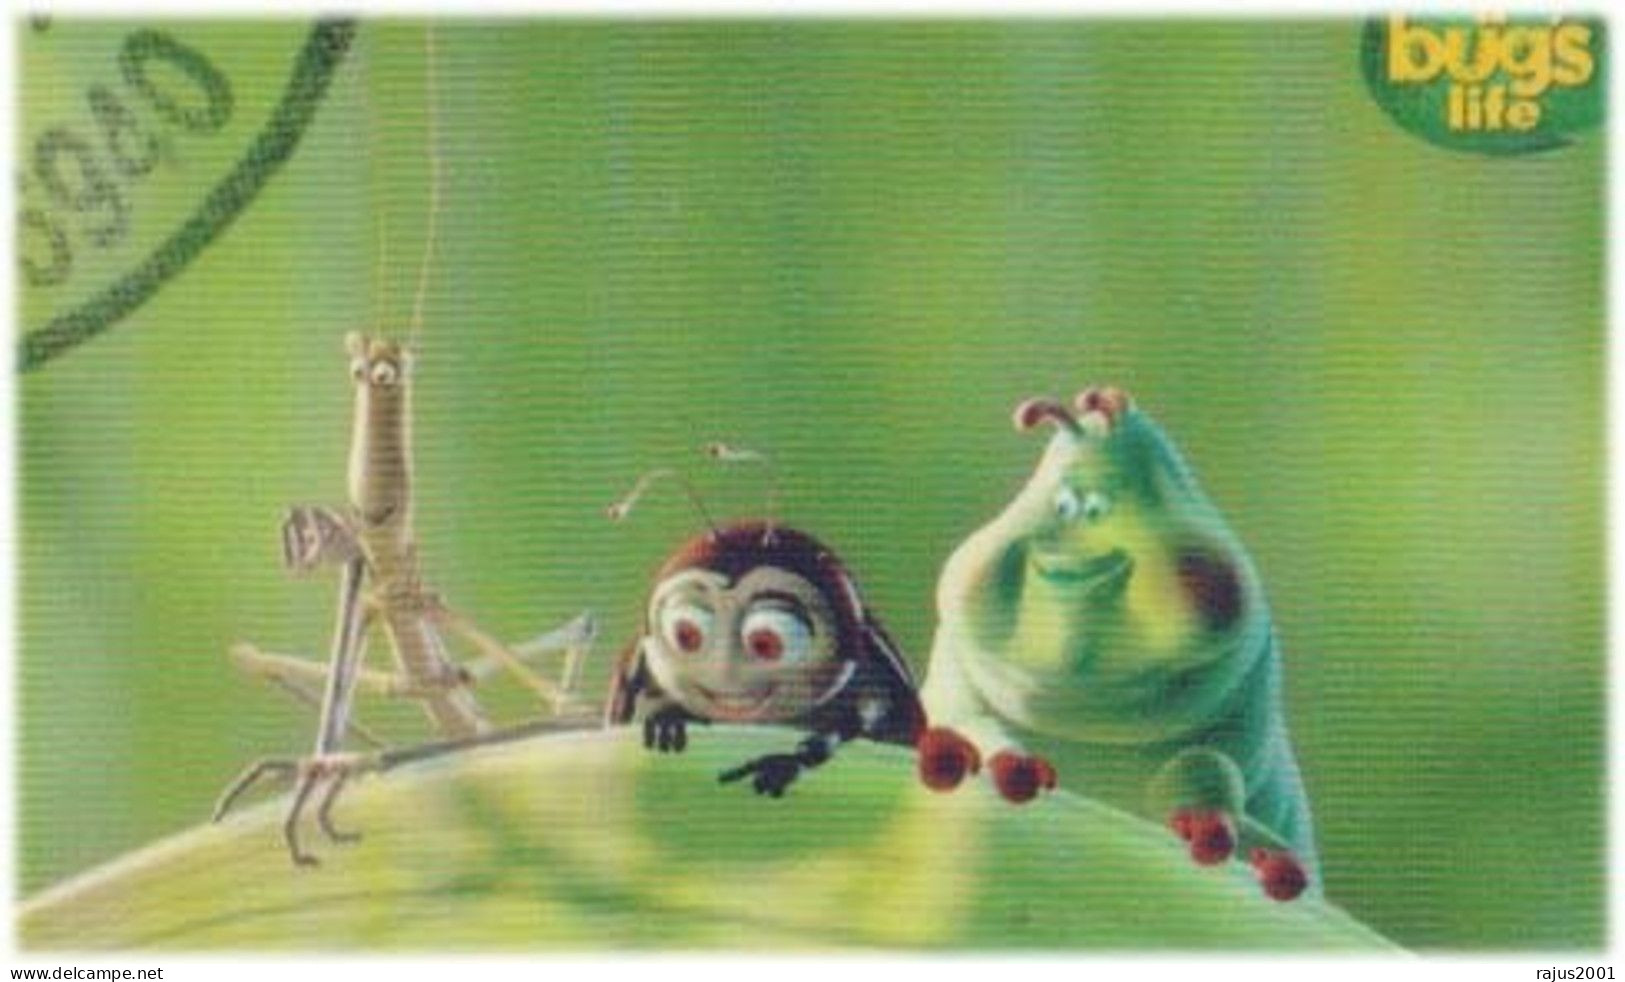 Disney Pixar, Bug, Bugs Life, Insects, Insect, Queen Ant, Ants, Beetles, Butterfly,  Cartoon, Animal, Souvenir Sheet FDC - Butterflies